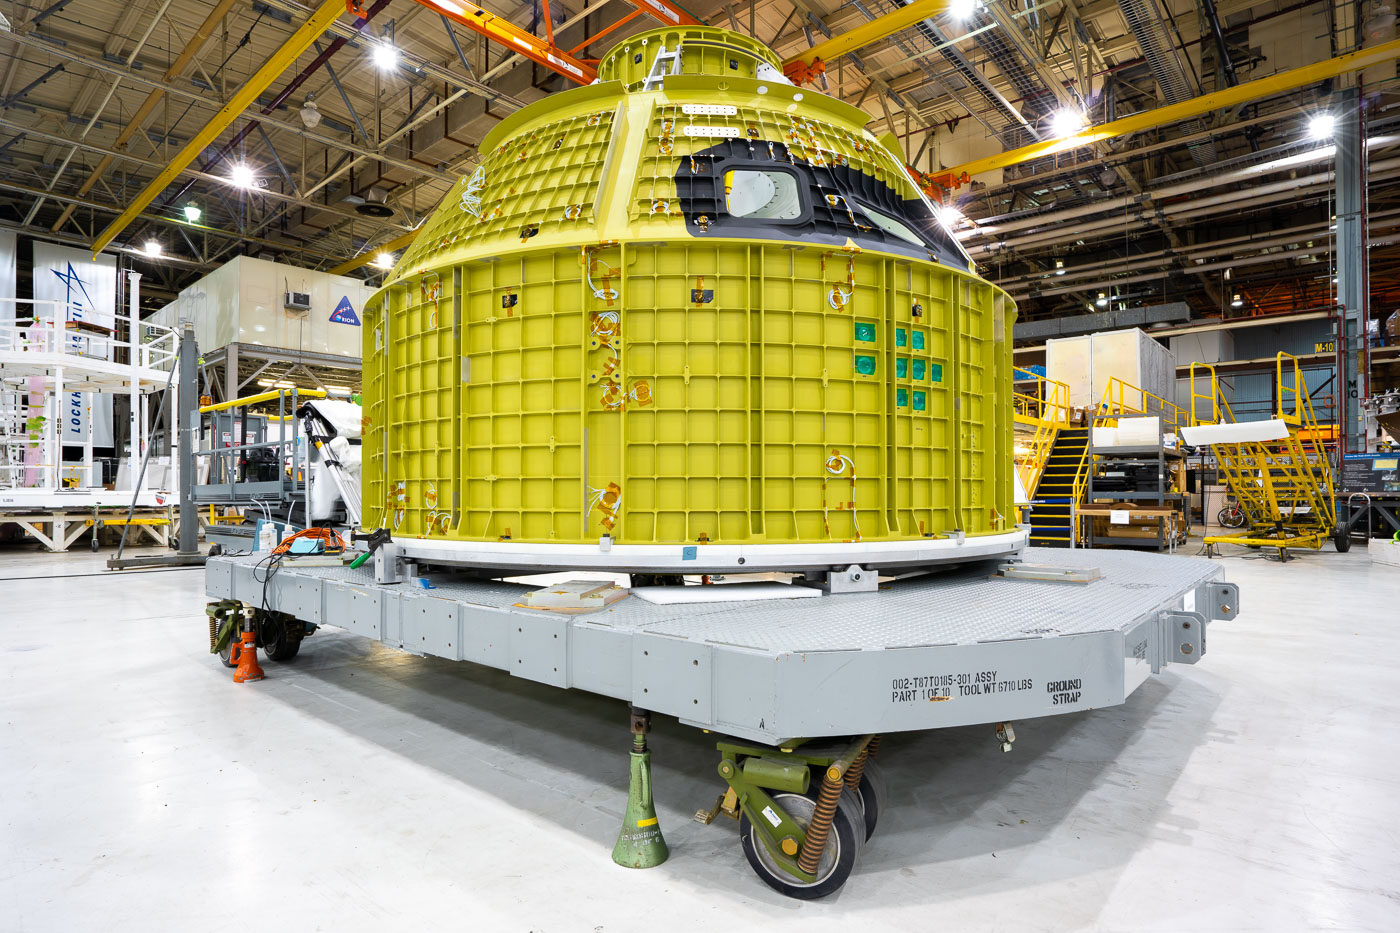 NASA”s Artemis II crew module at NASA’s Michoud Assembly Facility.

As of March 2024 the launch date is planned for September 2024. It’ll be the first crewed mission of the Orion Spacecraft and will do a moon flyby. It’ll be the first crew to travel beyond low orbit earth since 1972.